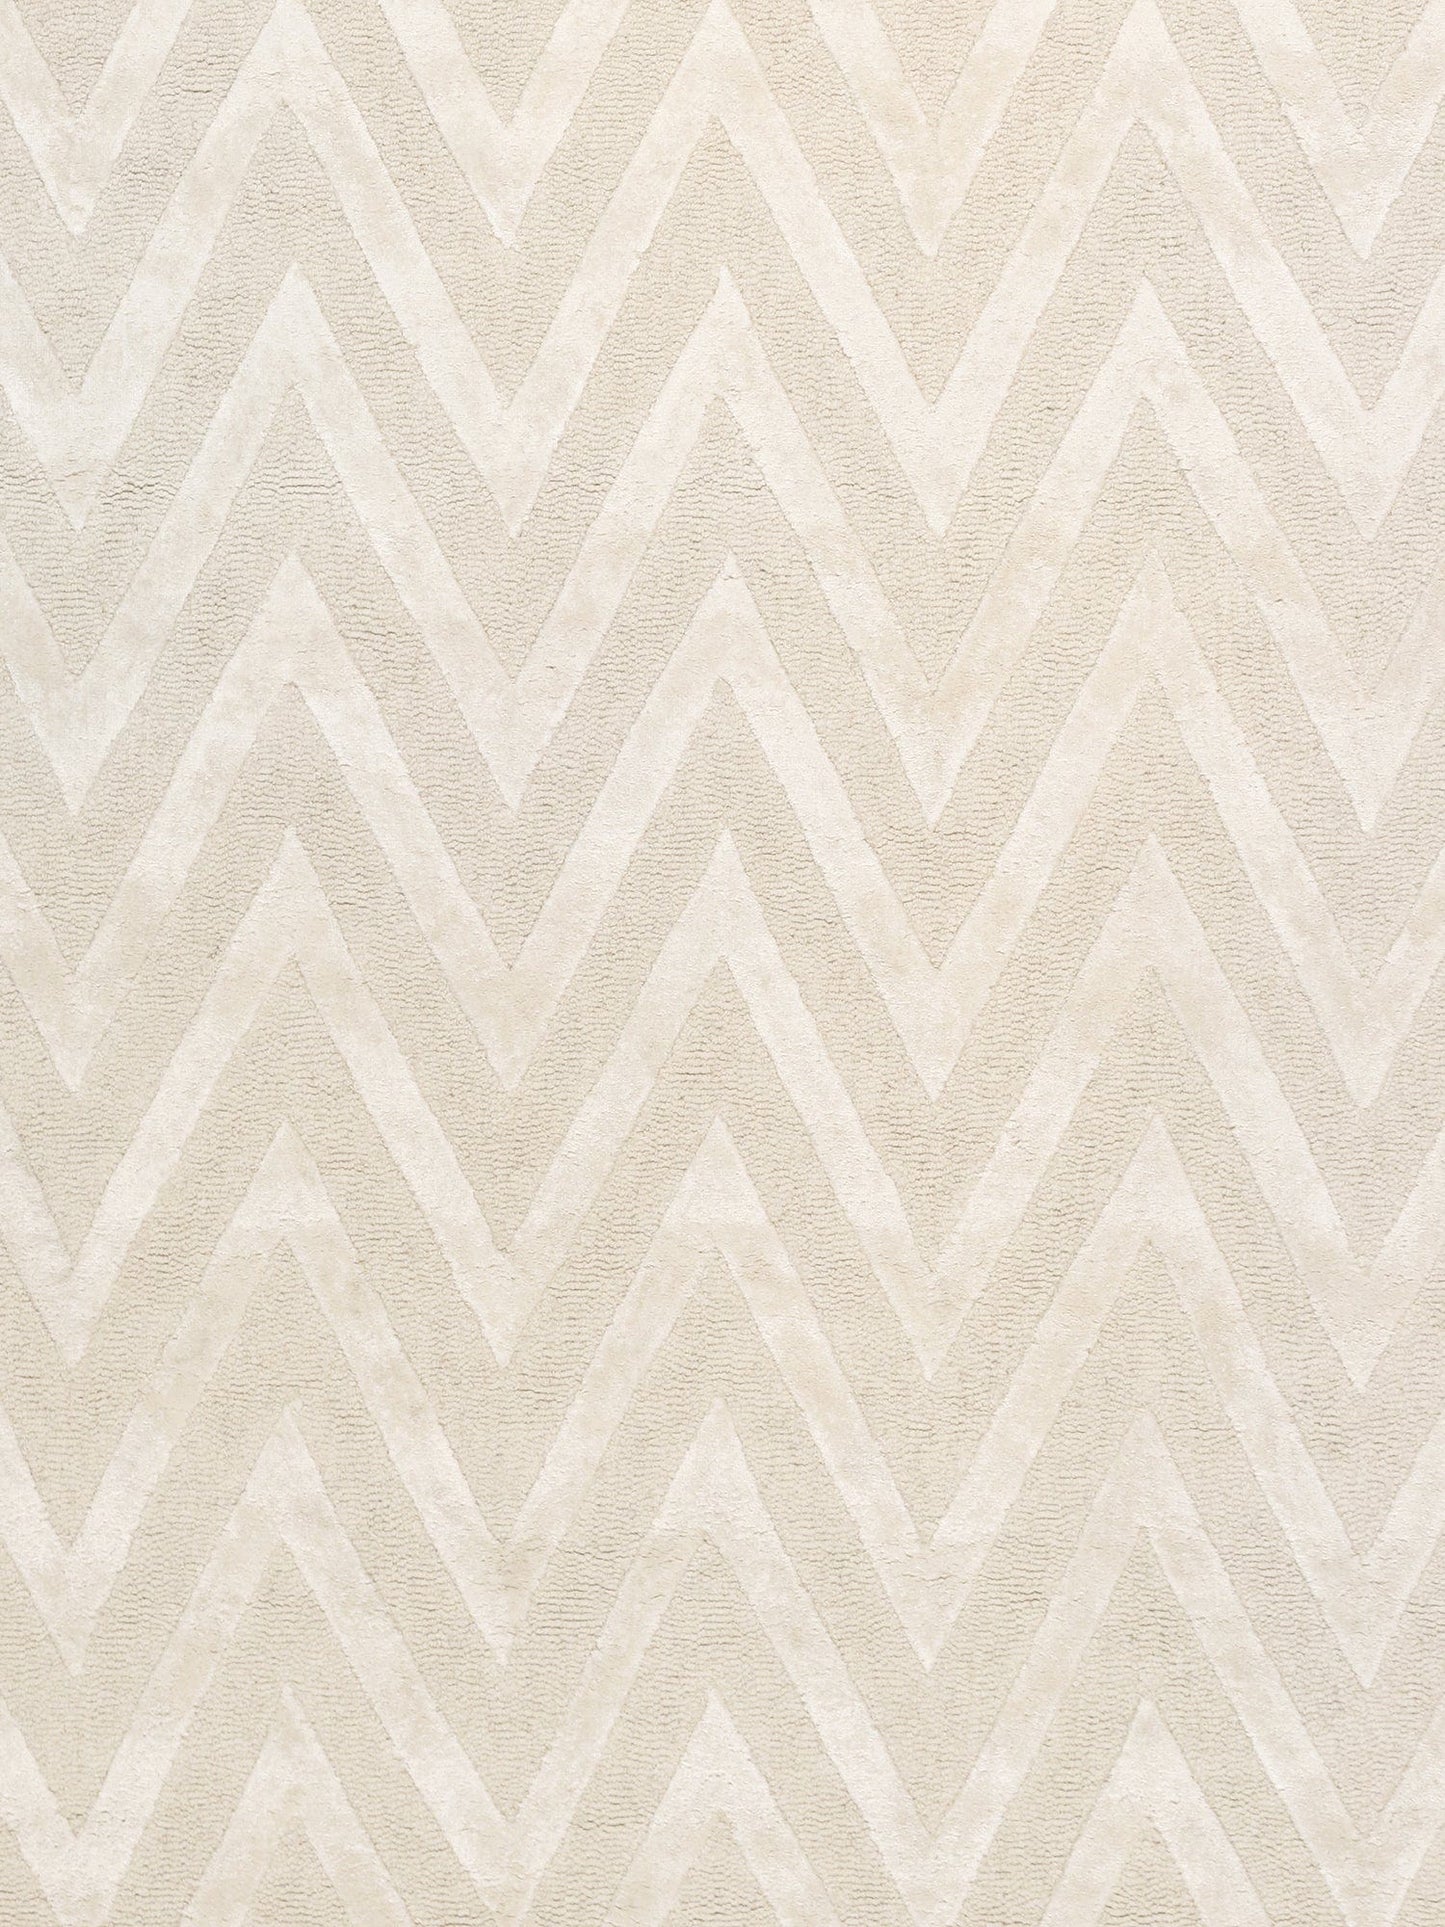 Pasargad Home Edgy Collection Hand-Tufted Bamboo Silk & Wool Area Rug,  8' 9" X 11' 9", Ivory